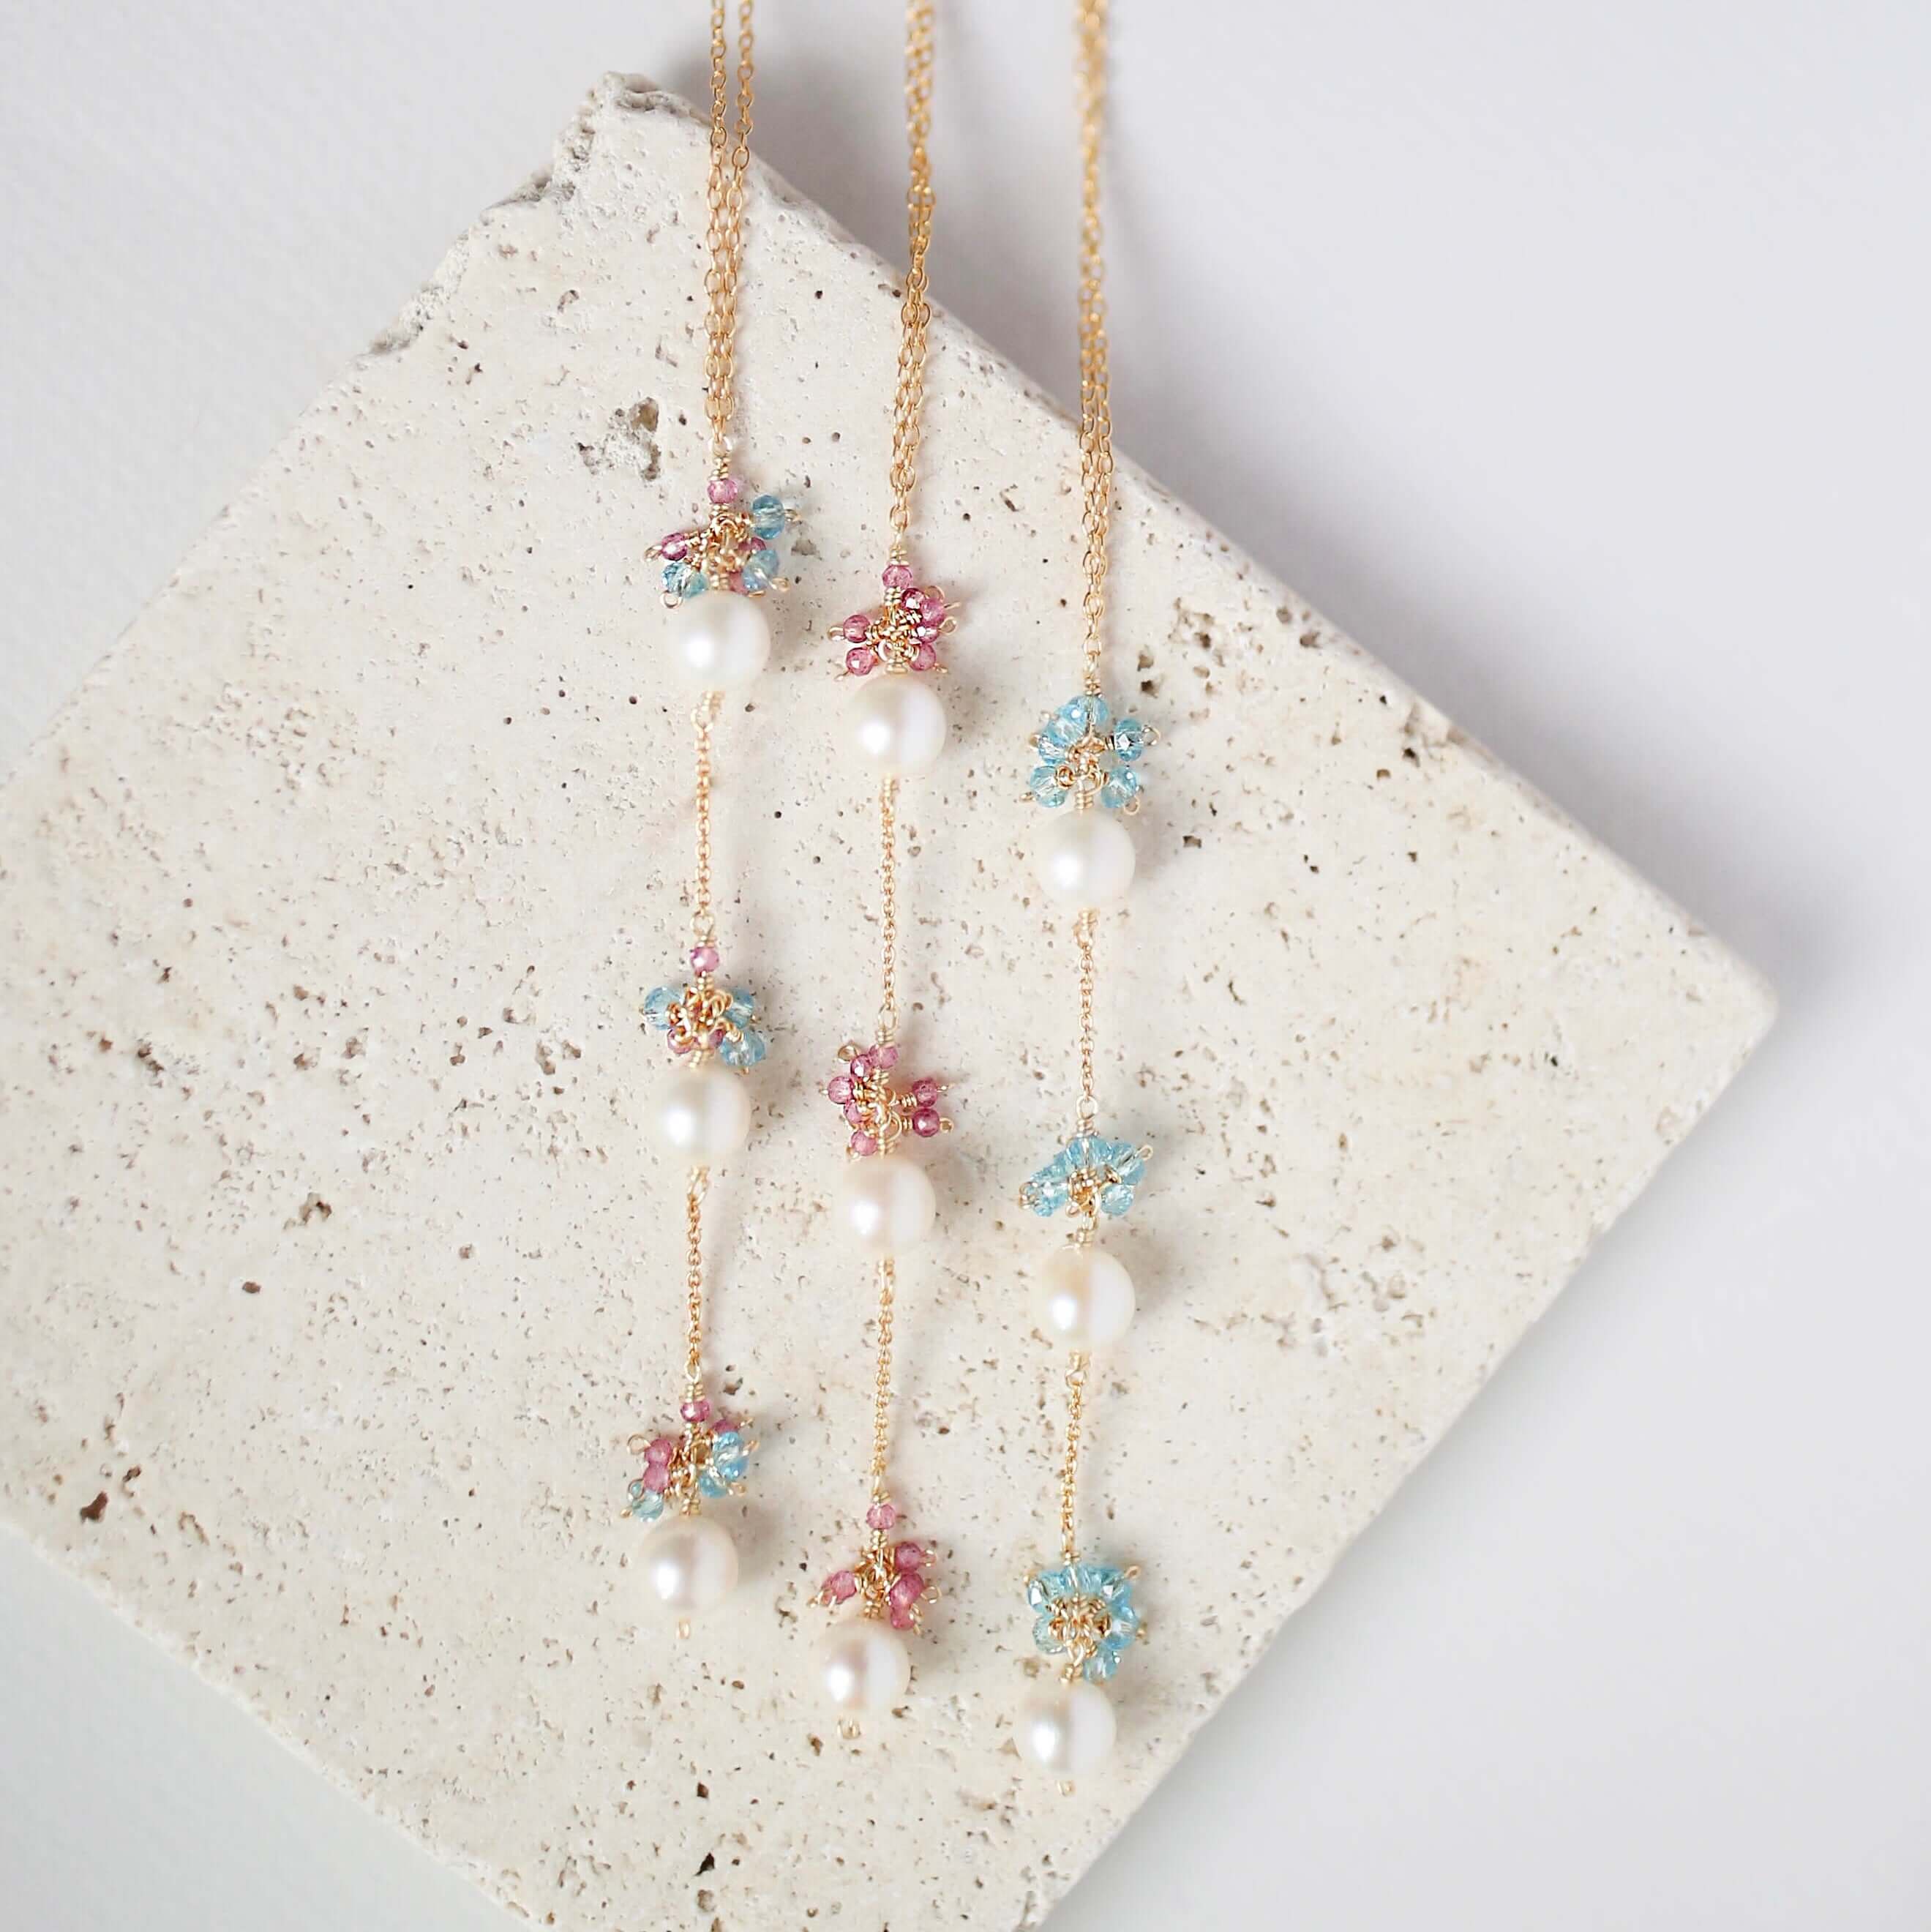 Colorful Gold plated Necklace with 3 white freshwater bead pearls paired with genuine Pink Tourmaline quartz and aquamarine quartz gemstones